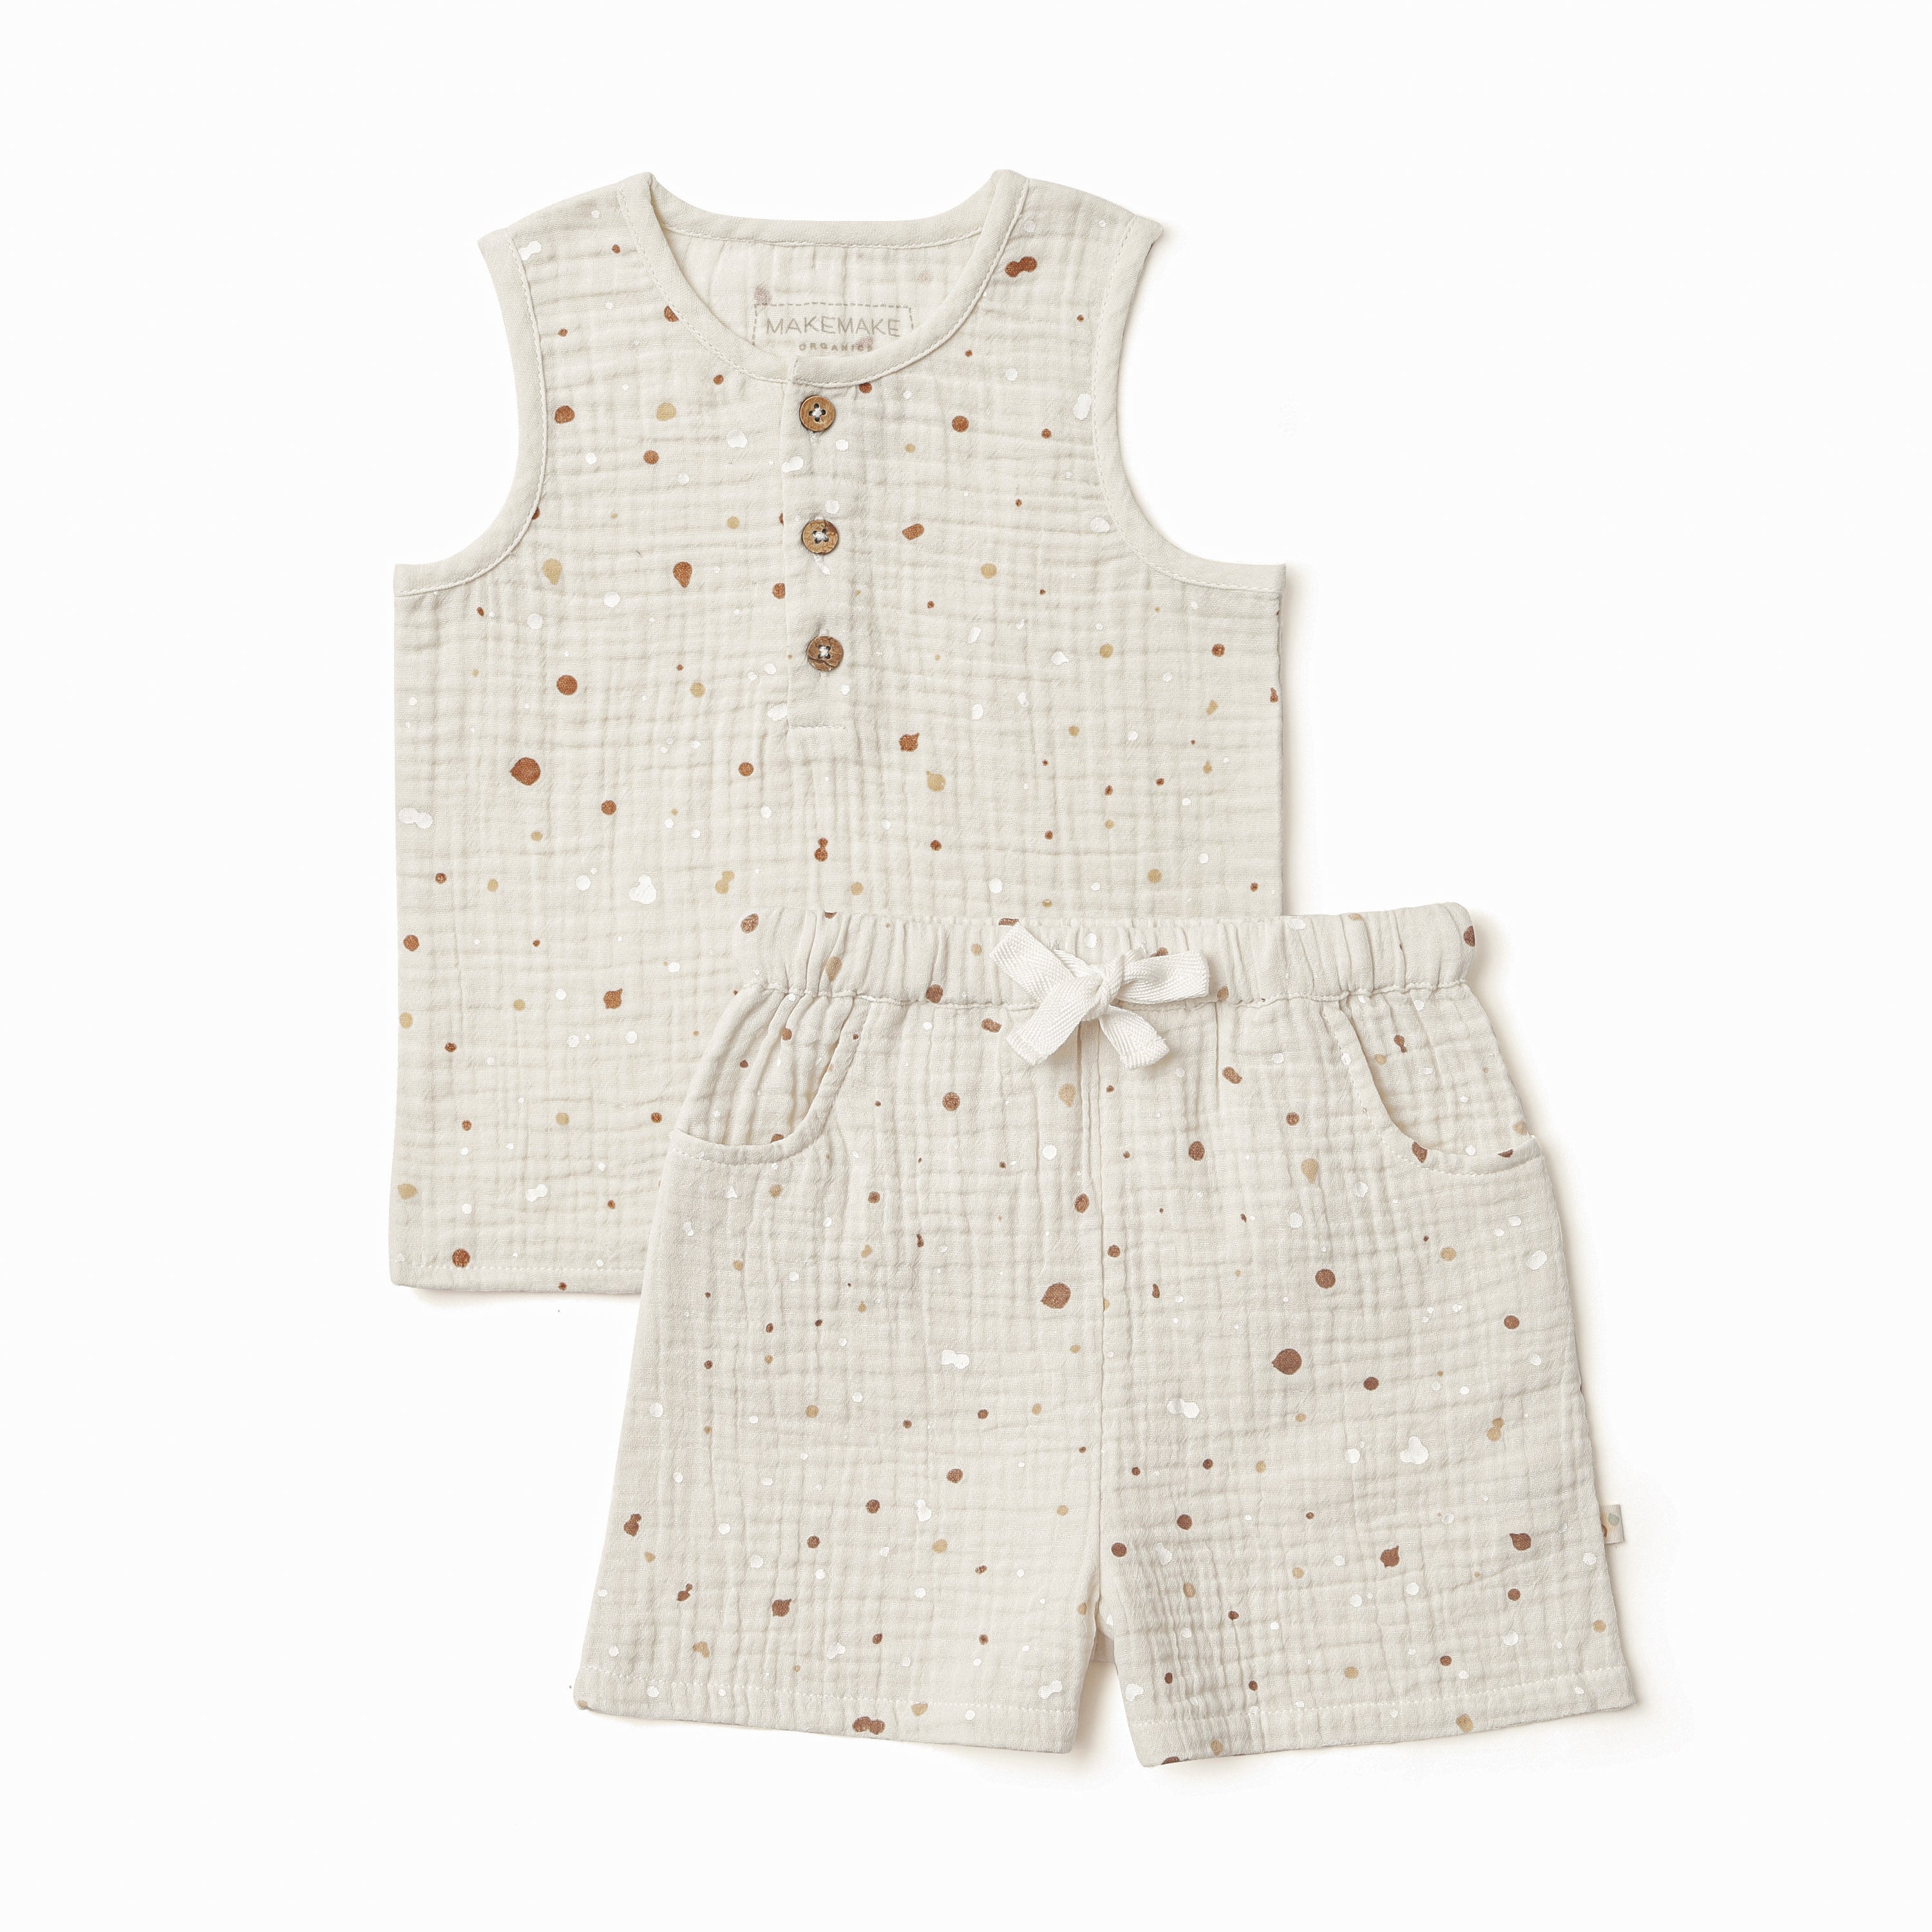 Two-piece children's outfit from Organic Kids displayed on a white background, consisting of a beige sleeveless top with brown button detail and matching shorts with a drawstring waist, both featuring a speckle print.